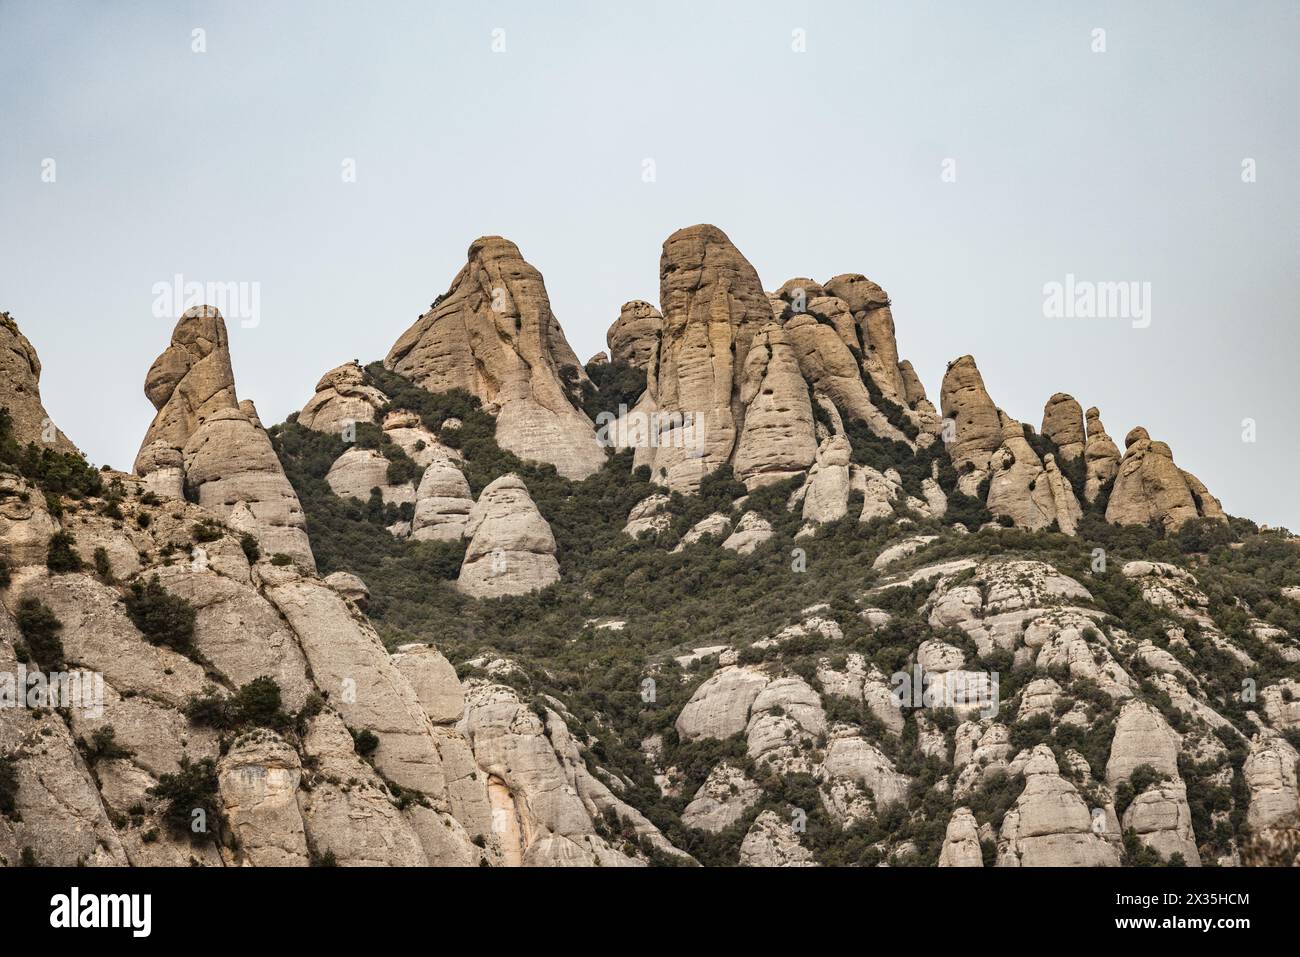 Mountains and rock formations in the Montserrat Range, near Barcelona, Catalonia, Spain. Stock Photo